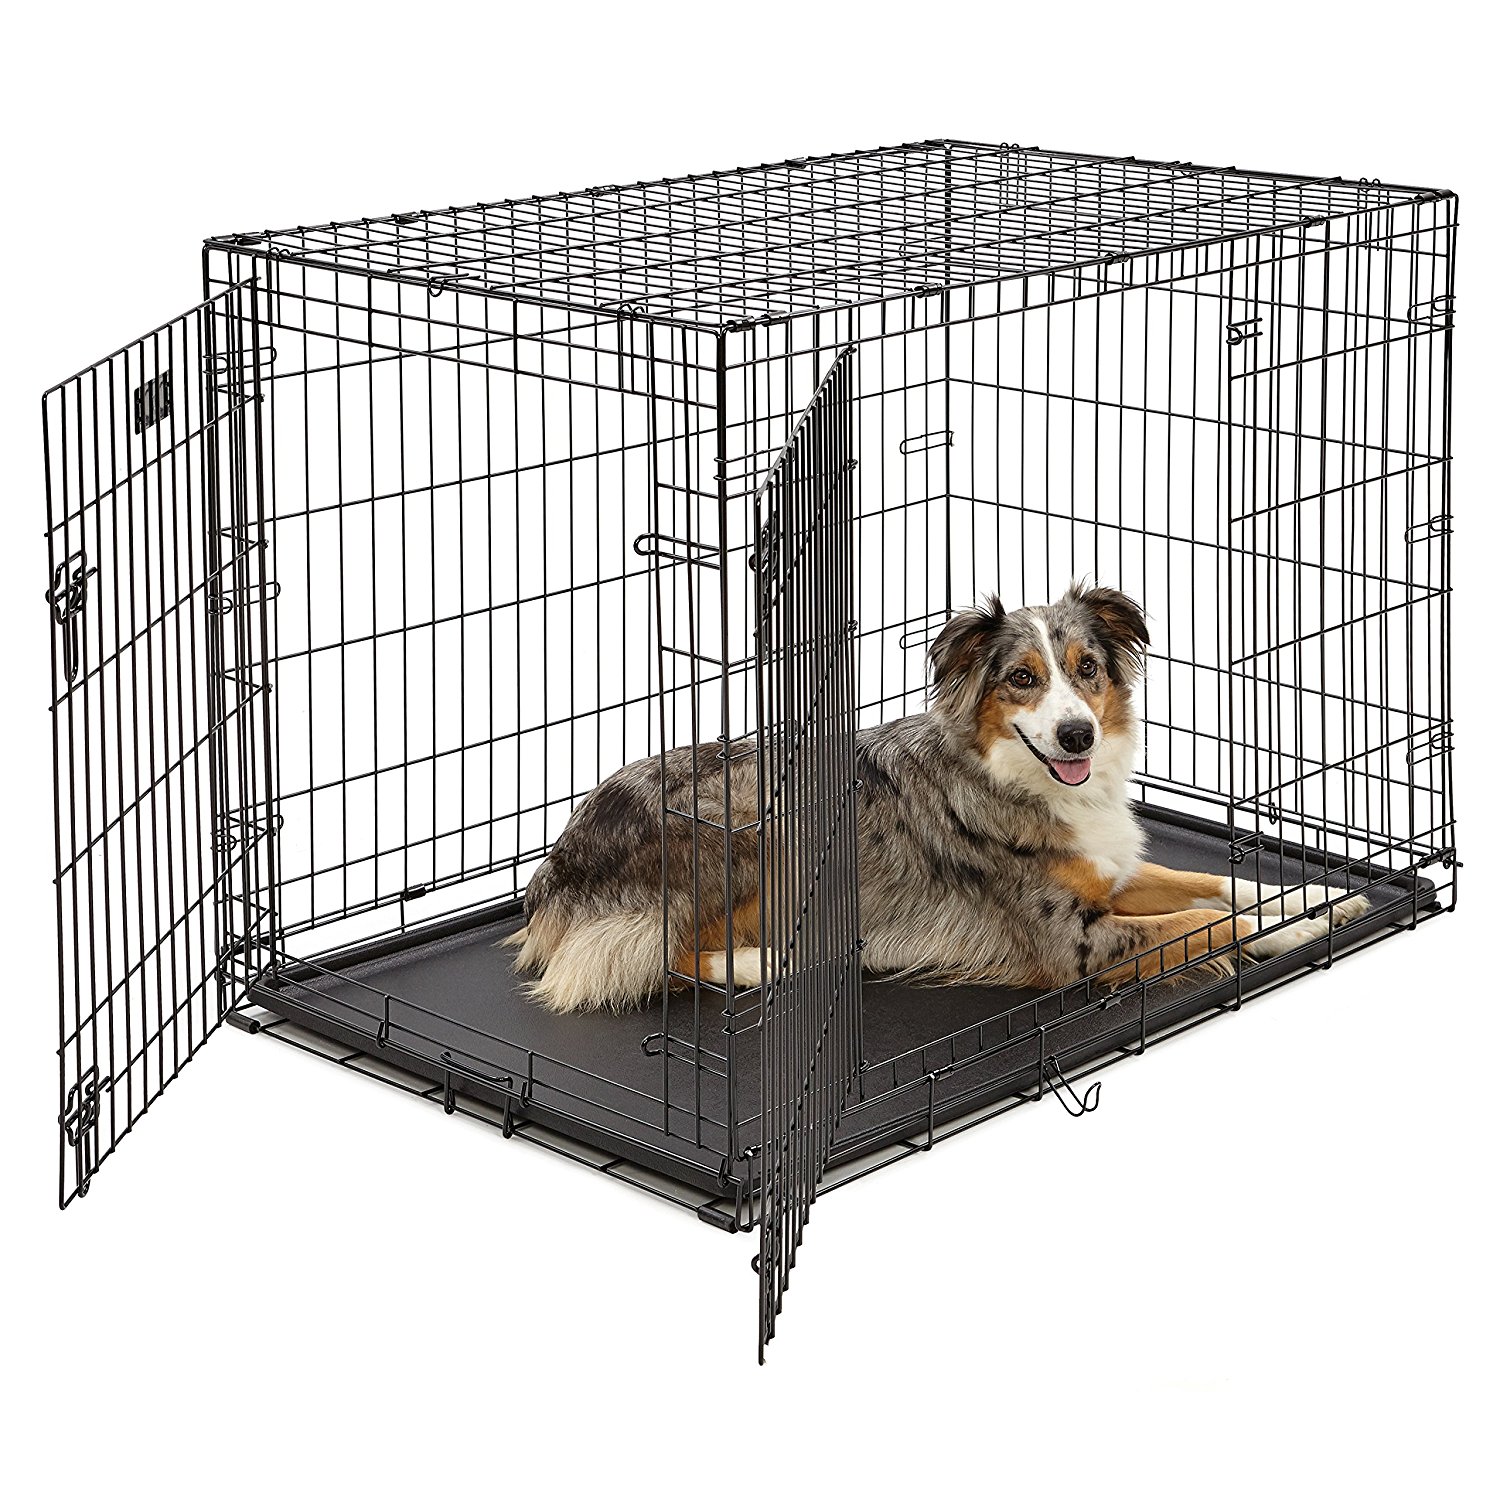 Amazon.com : Large Dog Crate | MidWest iCrate Double Door Folding ...